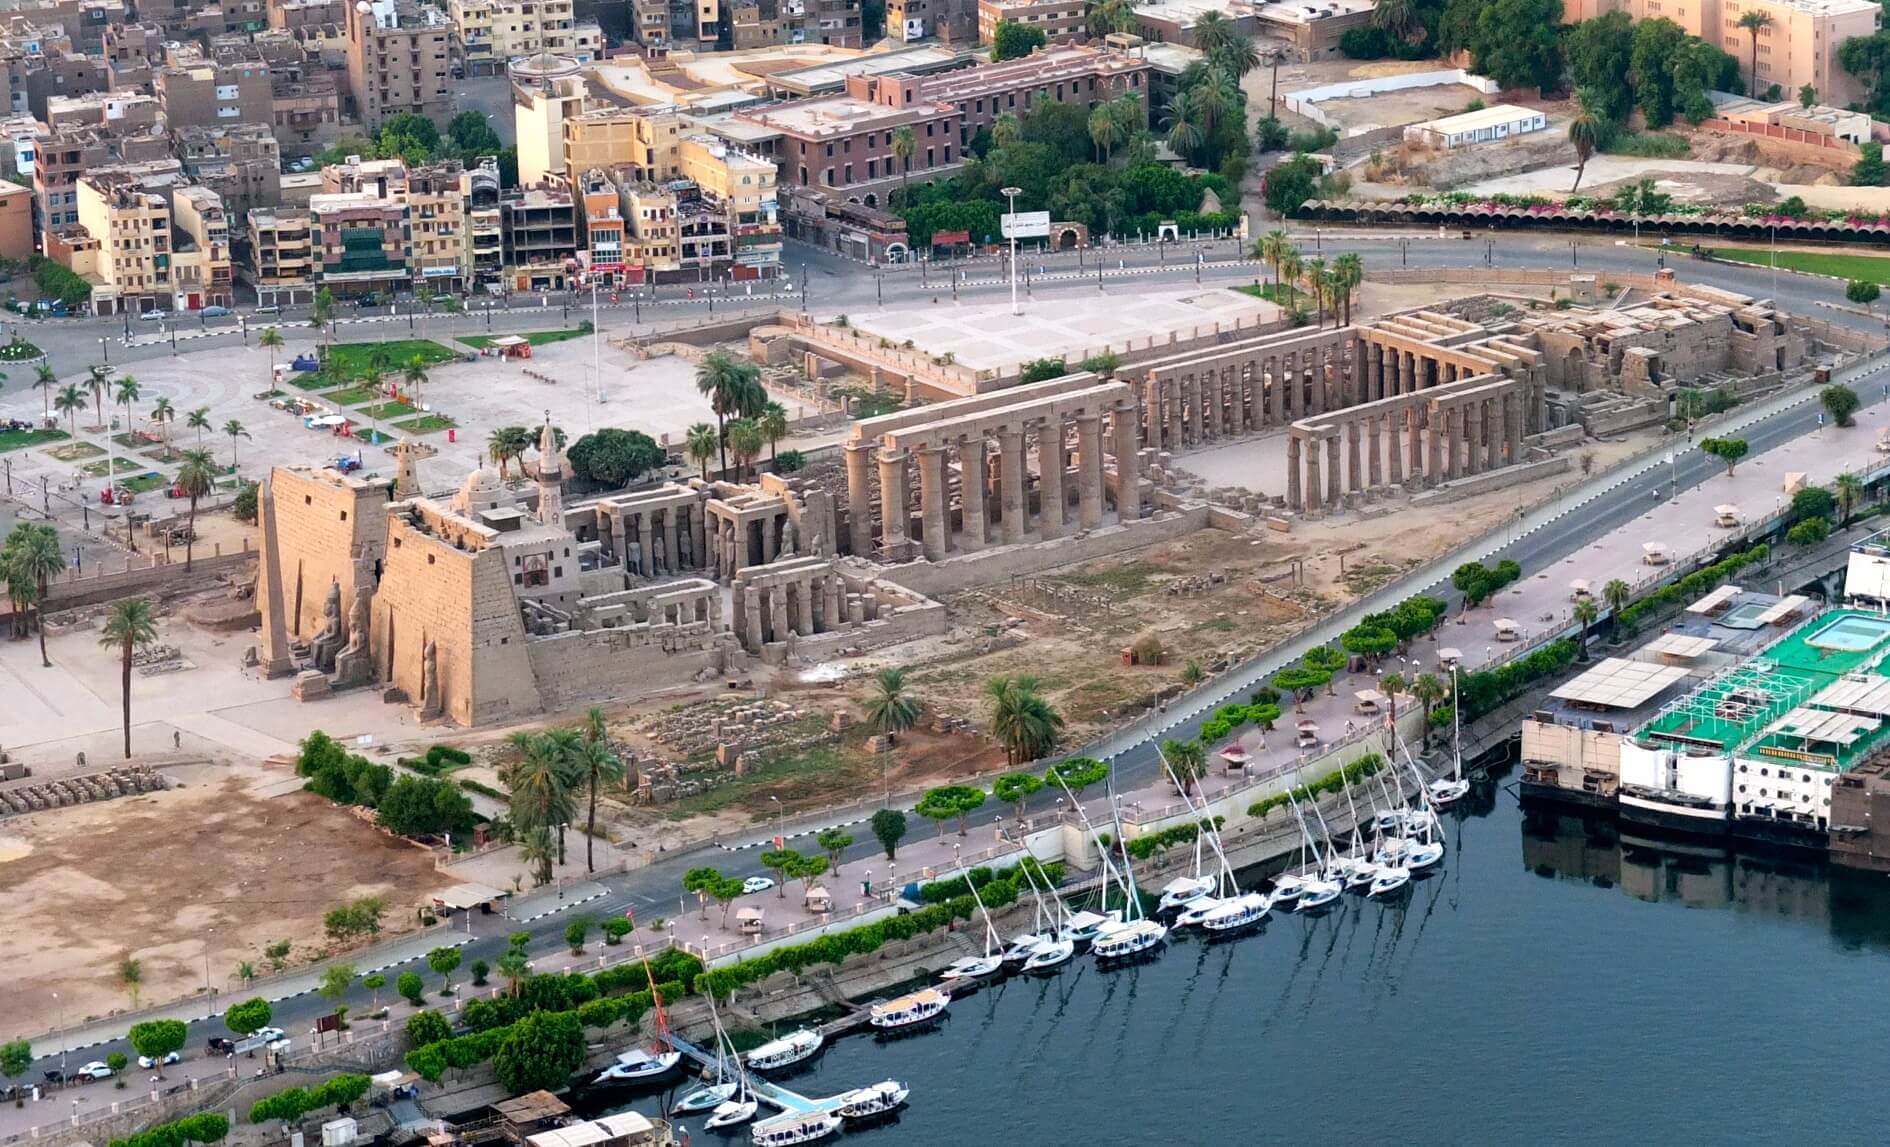 TEMPLE OF LUXOR